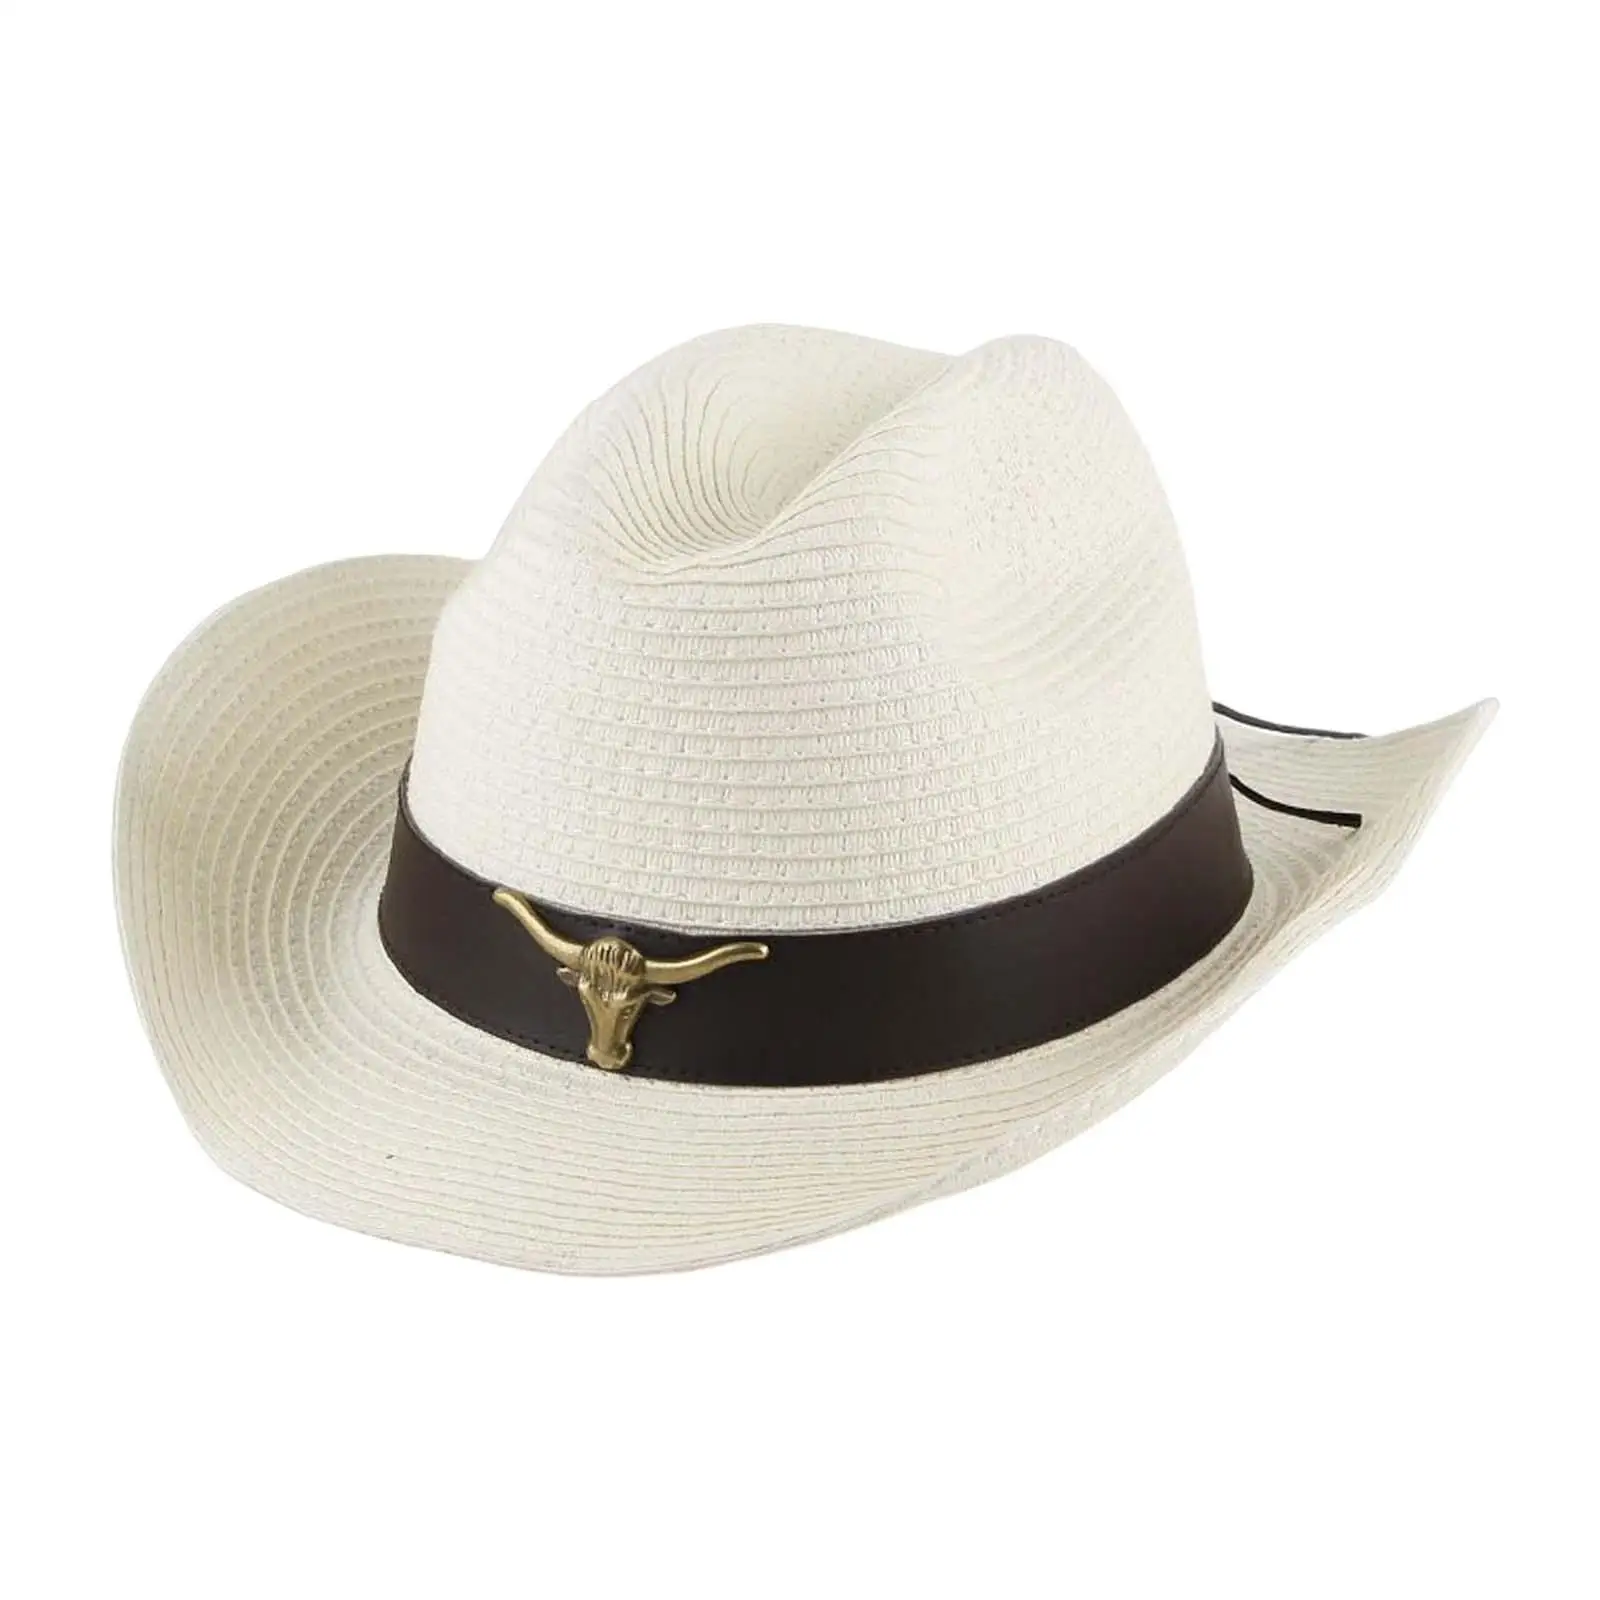 Classic Western Cowboy Hat Wide Brimmed Sunshade Hat Unisex Straw Cow Decorate for Outdoor Leisure Summer Cowgirl Teens Men